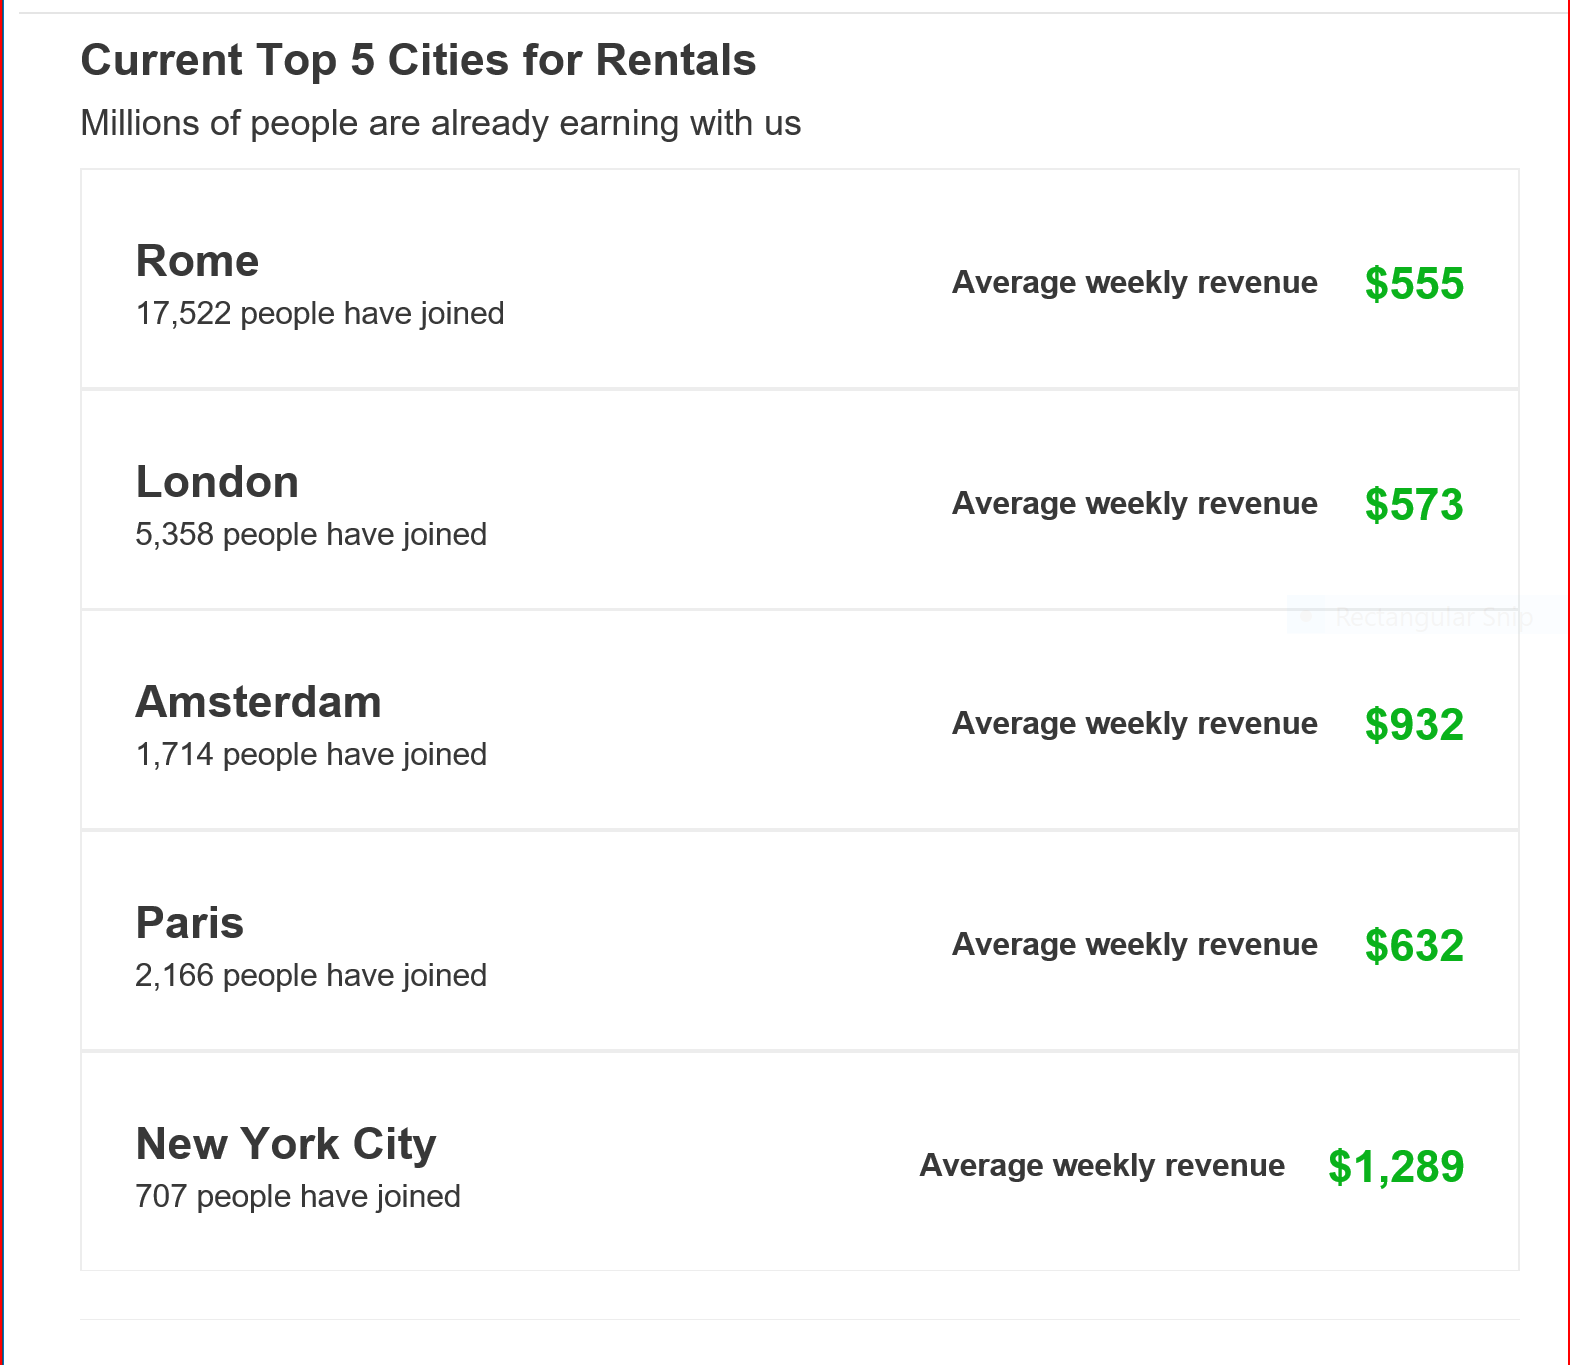 See what you can earn by listing your place on Booking.com Bellebnb.com by Bellebnb Hotel Direct Booking Management Software, You already enjoyed a stay at one of our millions of properties, why not earn some cash by renting your place during your next trip? Signing up is quick and easy, and you’ll enjoy peace of mind knowing Booking.com and Bellebnb.com has your back. We offer support 24/7 and the flexibility to pick your own prices, policies, and rules so you can find your perfect guest A Better Way to Manage Your Hotel · Hostel · B&B · Vacation Rental